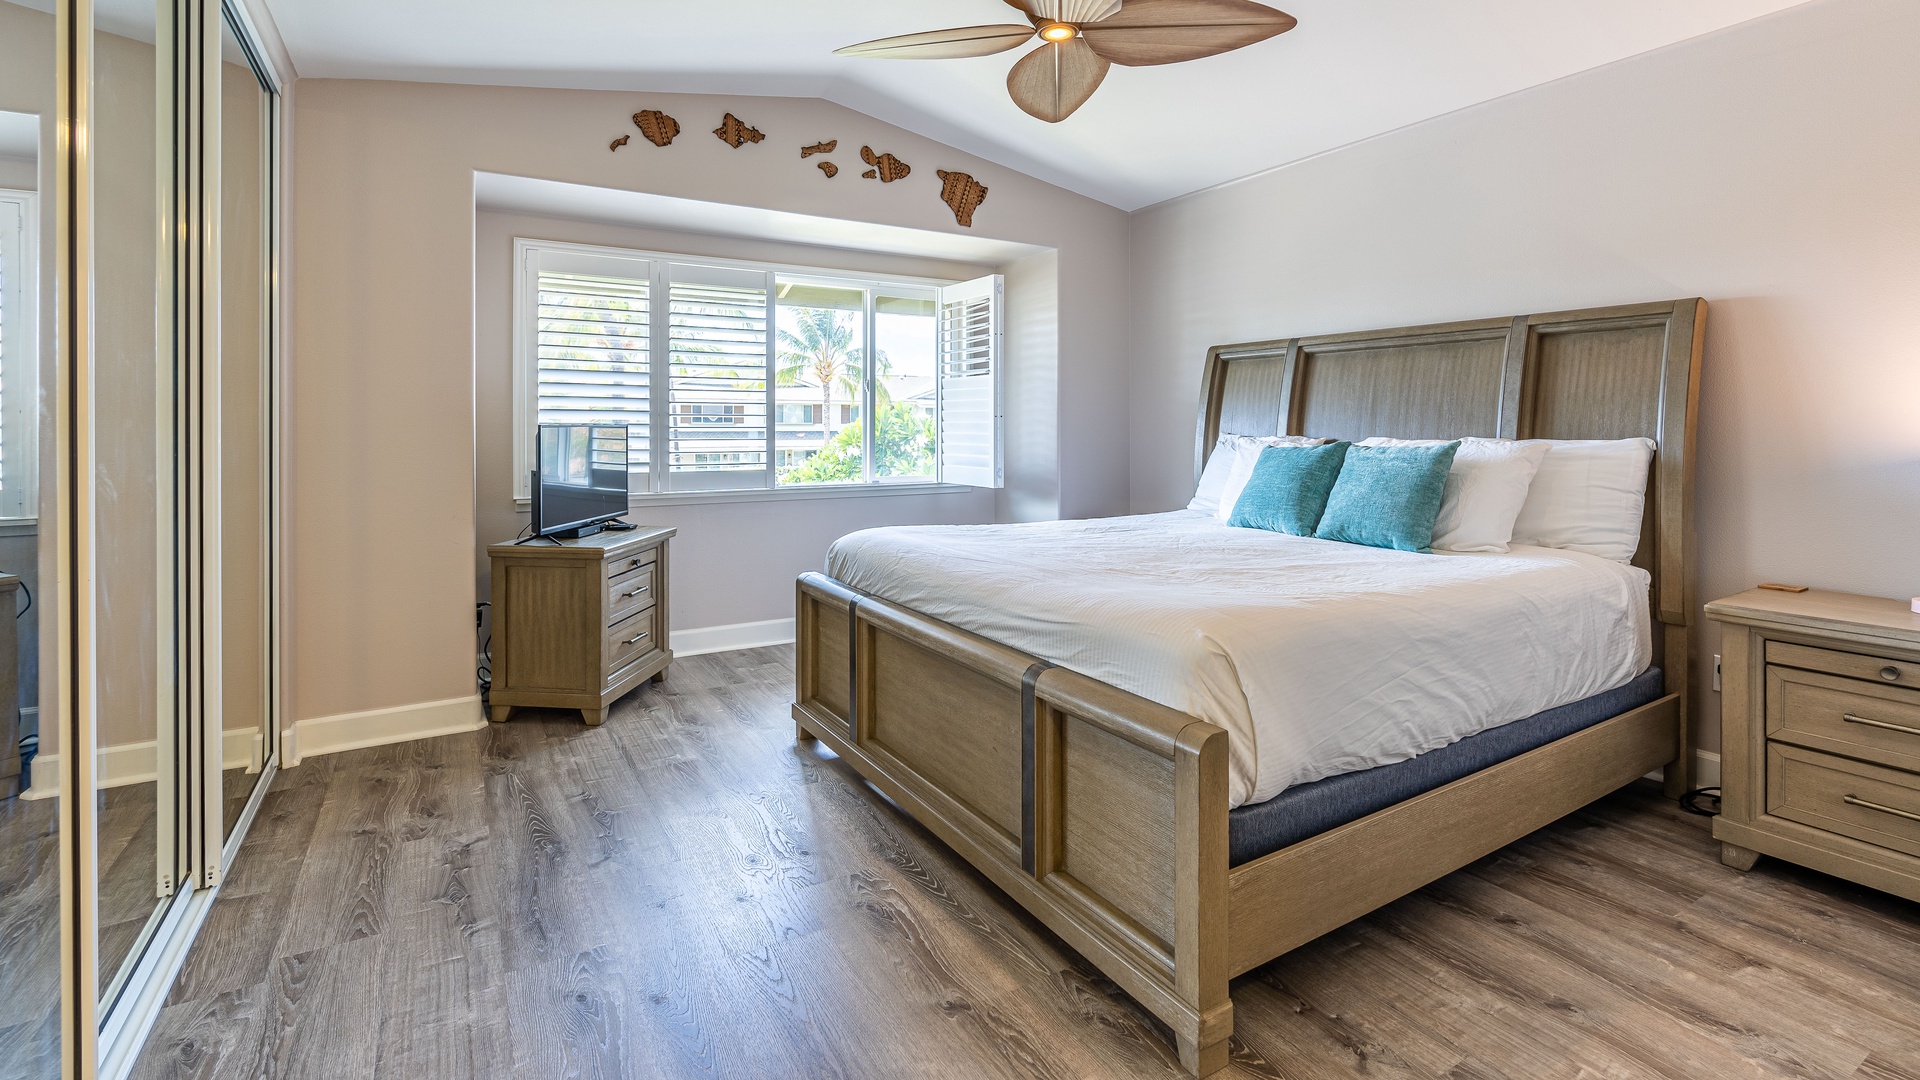 Kapolei Vacation Rentals, Hillside Villas 1508-2 - The primary guest bedroom with a king size bed, dresser and television.